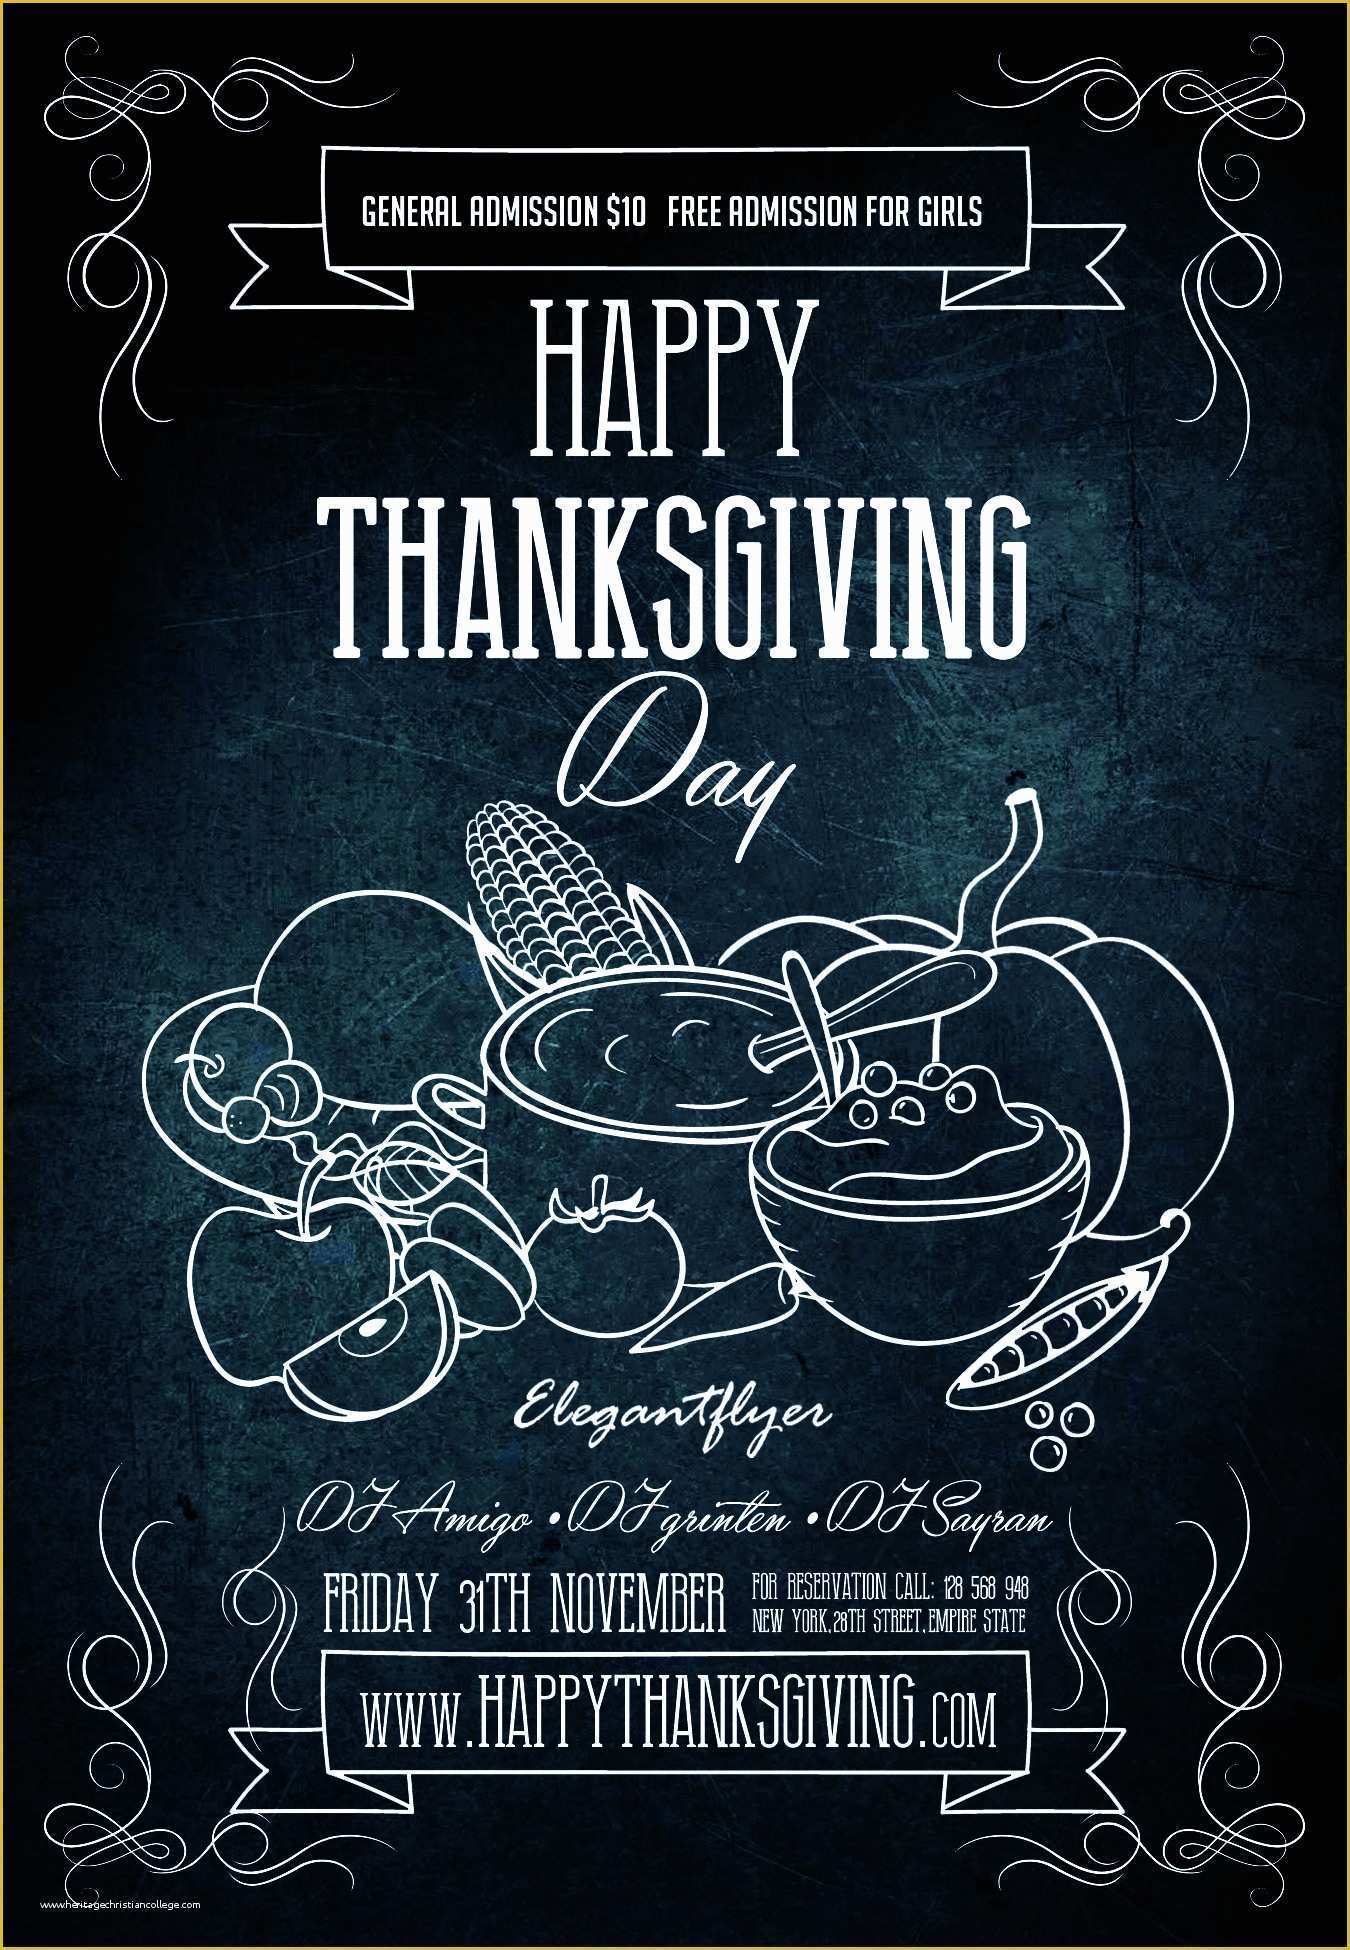 Thanksgiving Food Drive Flyer Template Free Of 23 Free Thanksgiving Flyers Psd Word Templates Demplates